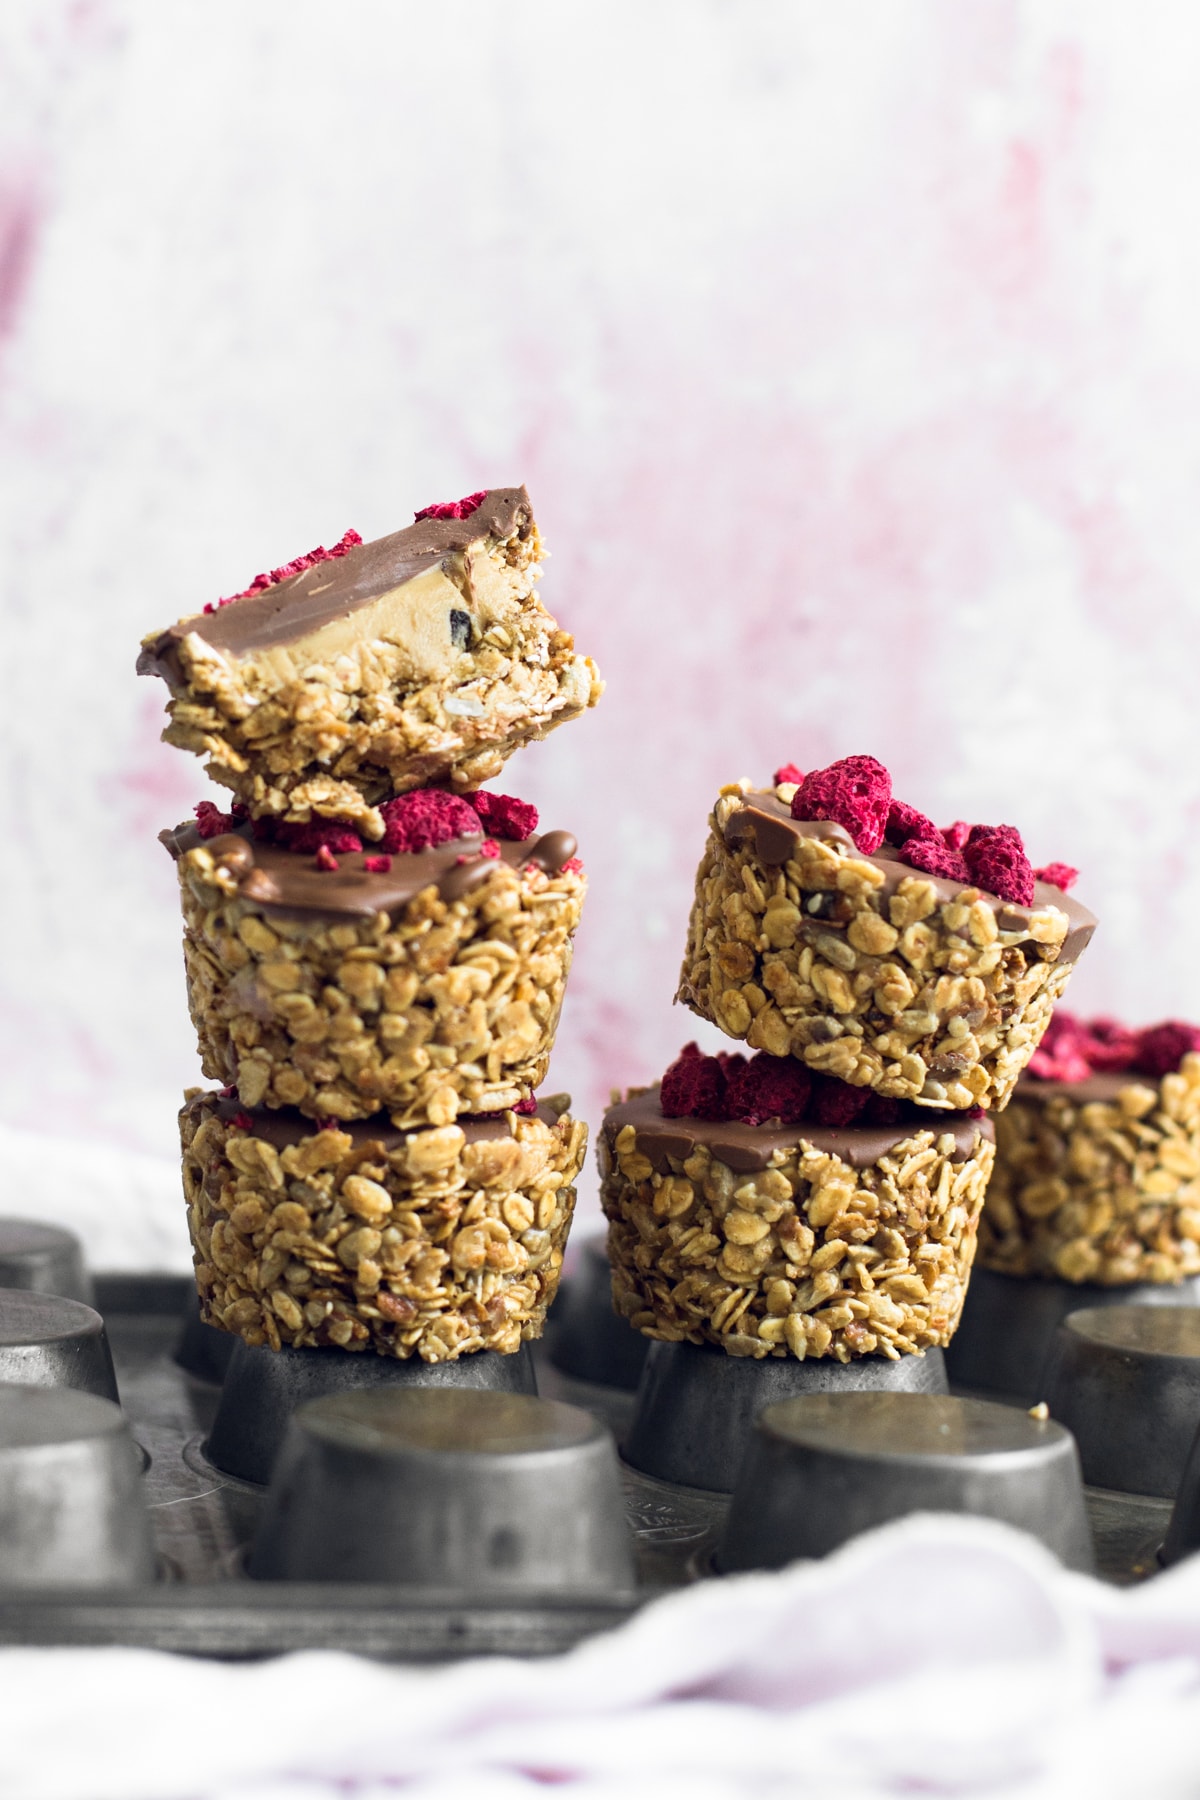 Simple No-Bake Vegan Granola Cups filled with Nut Butter of your choice and topped off with Chocolate. Read in under an hour. #vegan #granola #oats #chocolate #snacks #healthy #peanutbutter #nobake #slice #fridge #veganrecipes